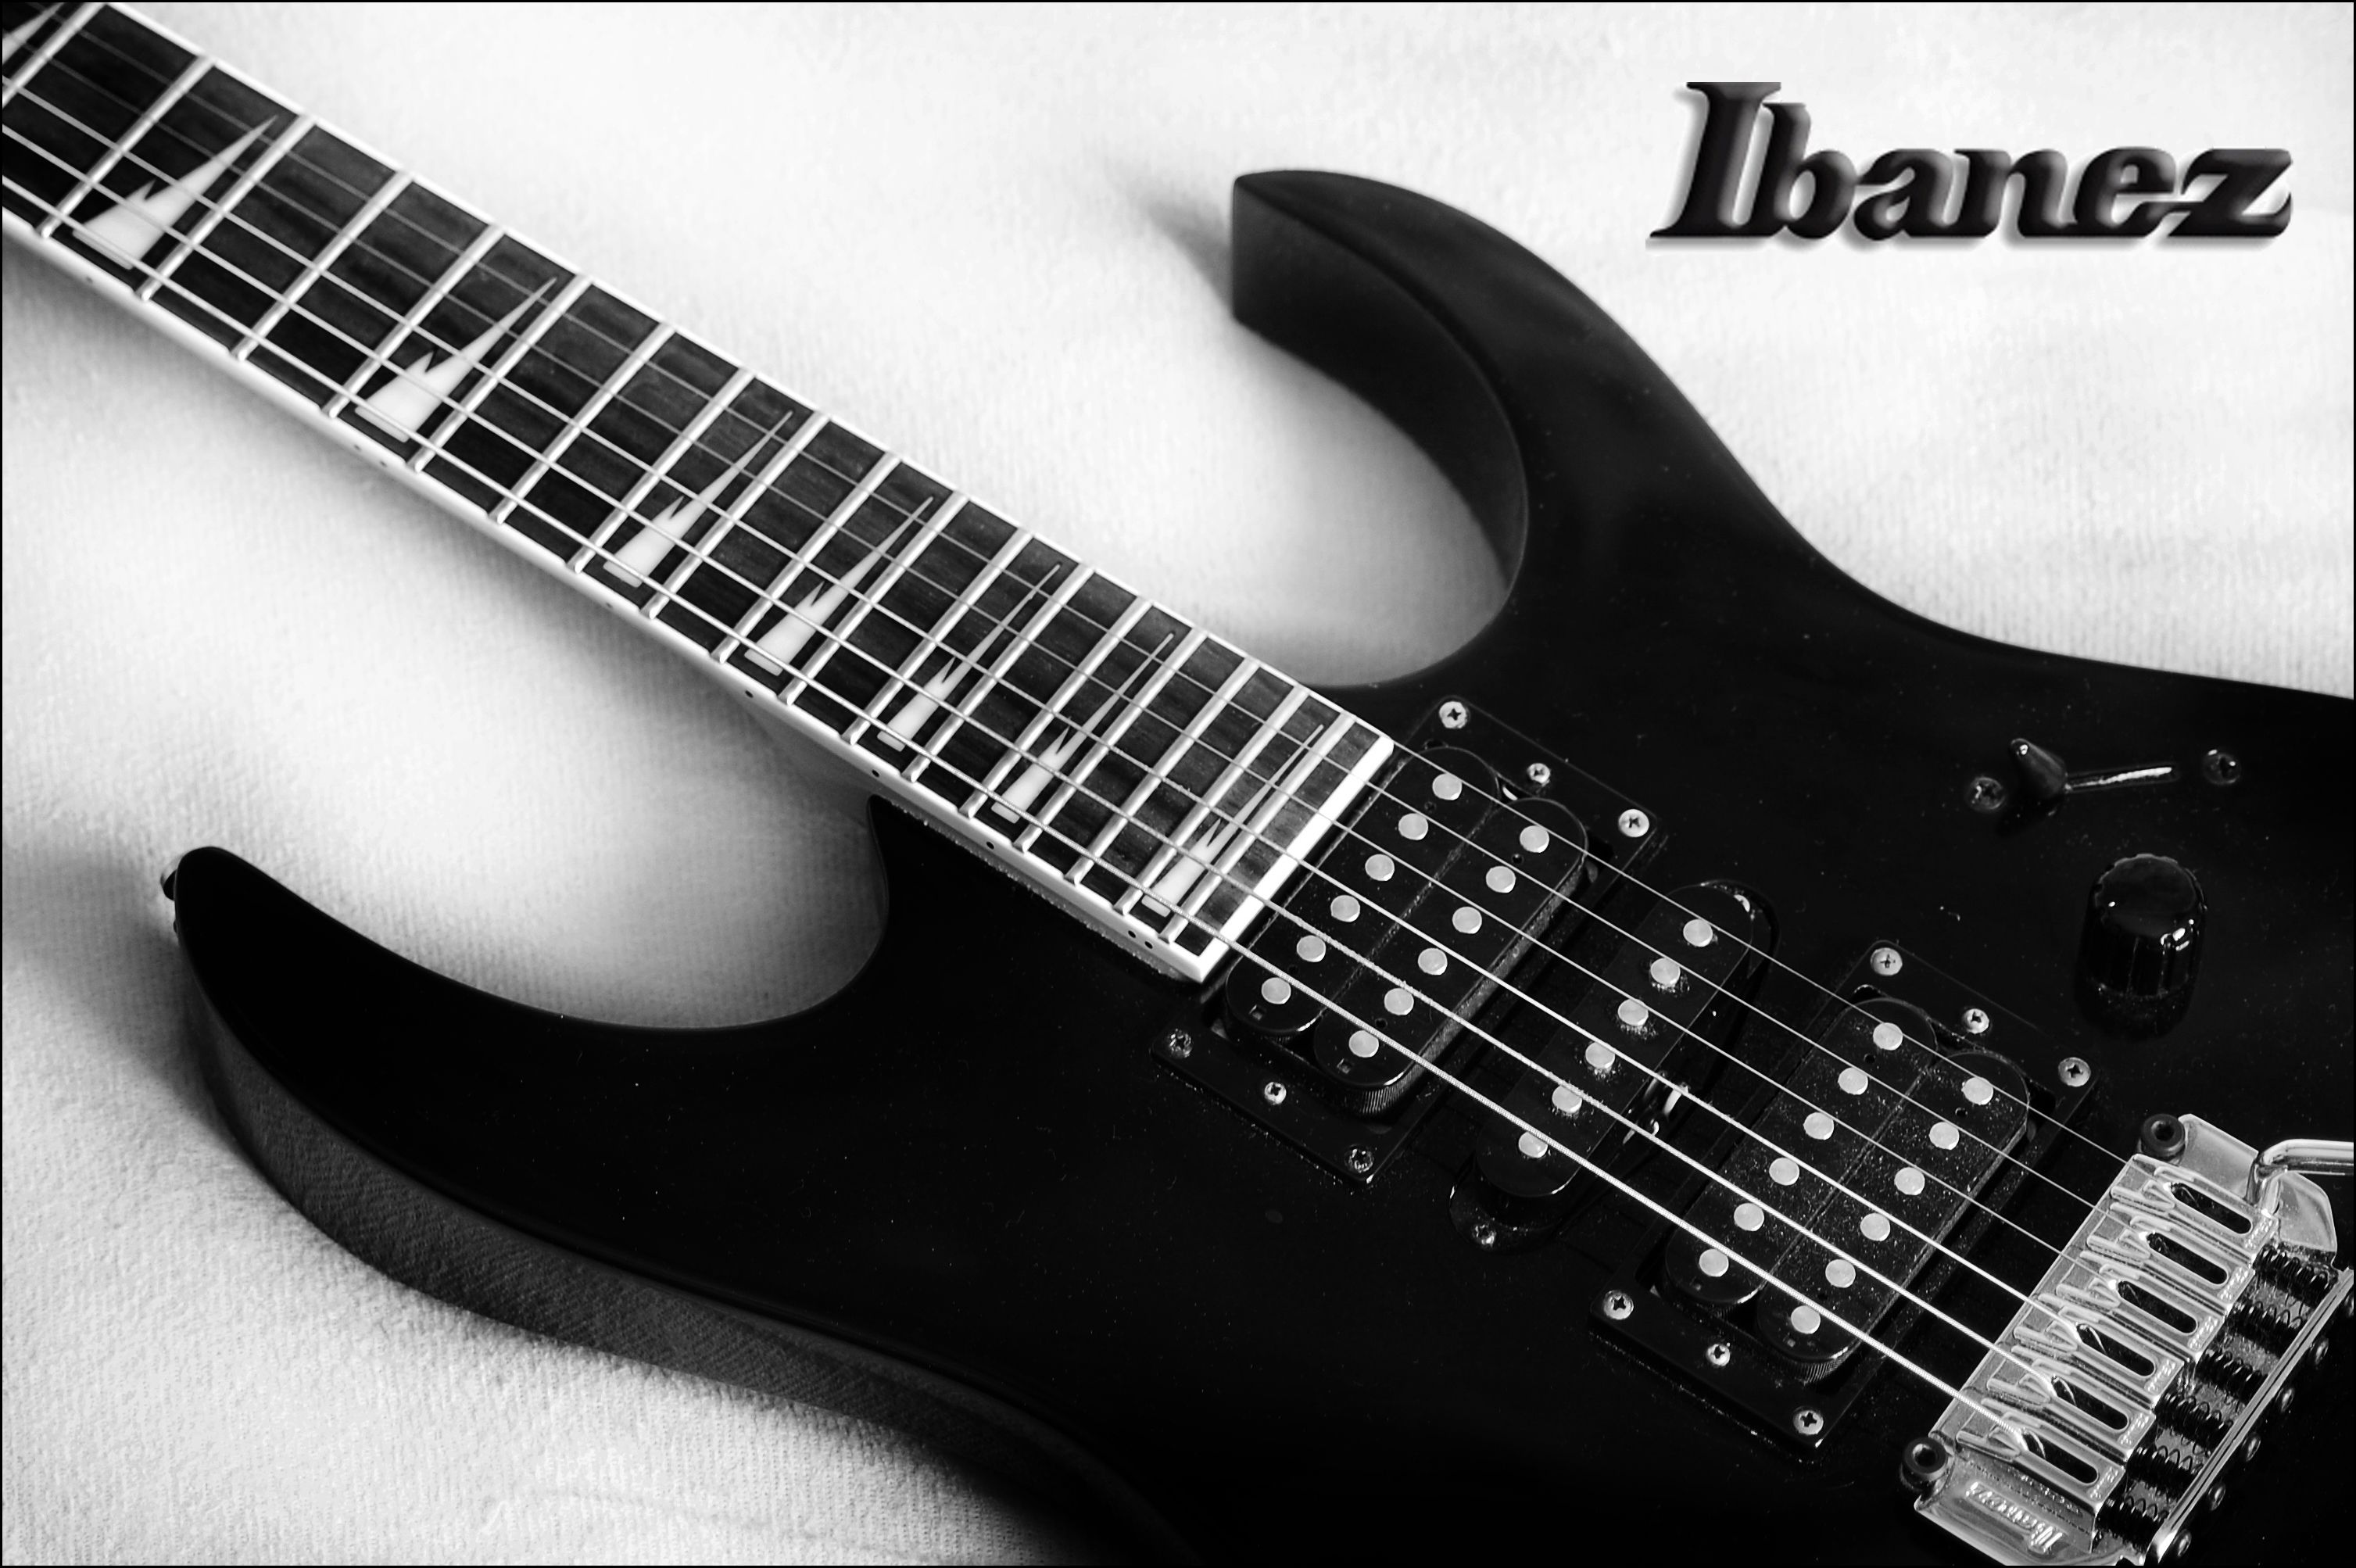 Ibanez Guitar By Joanchris photos of Ibanez Guitar Wallpapers for ...